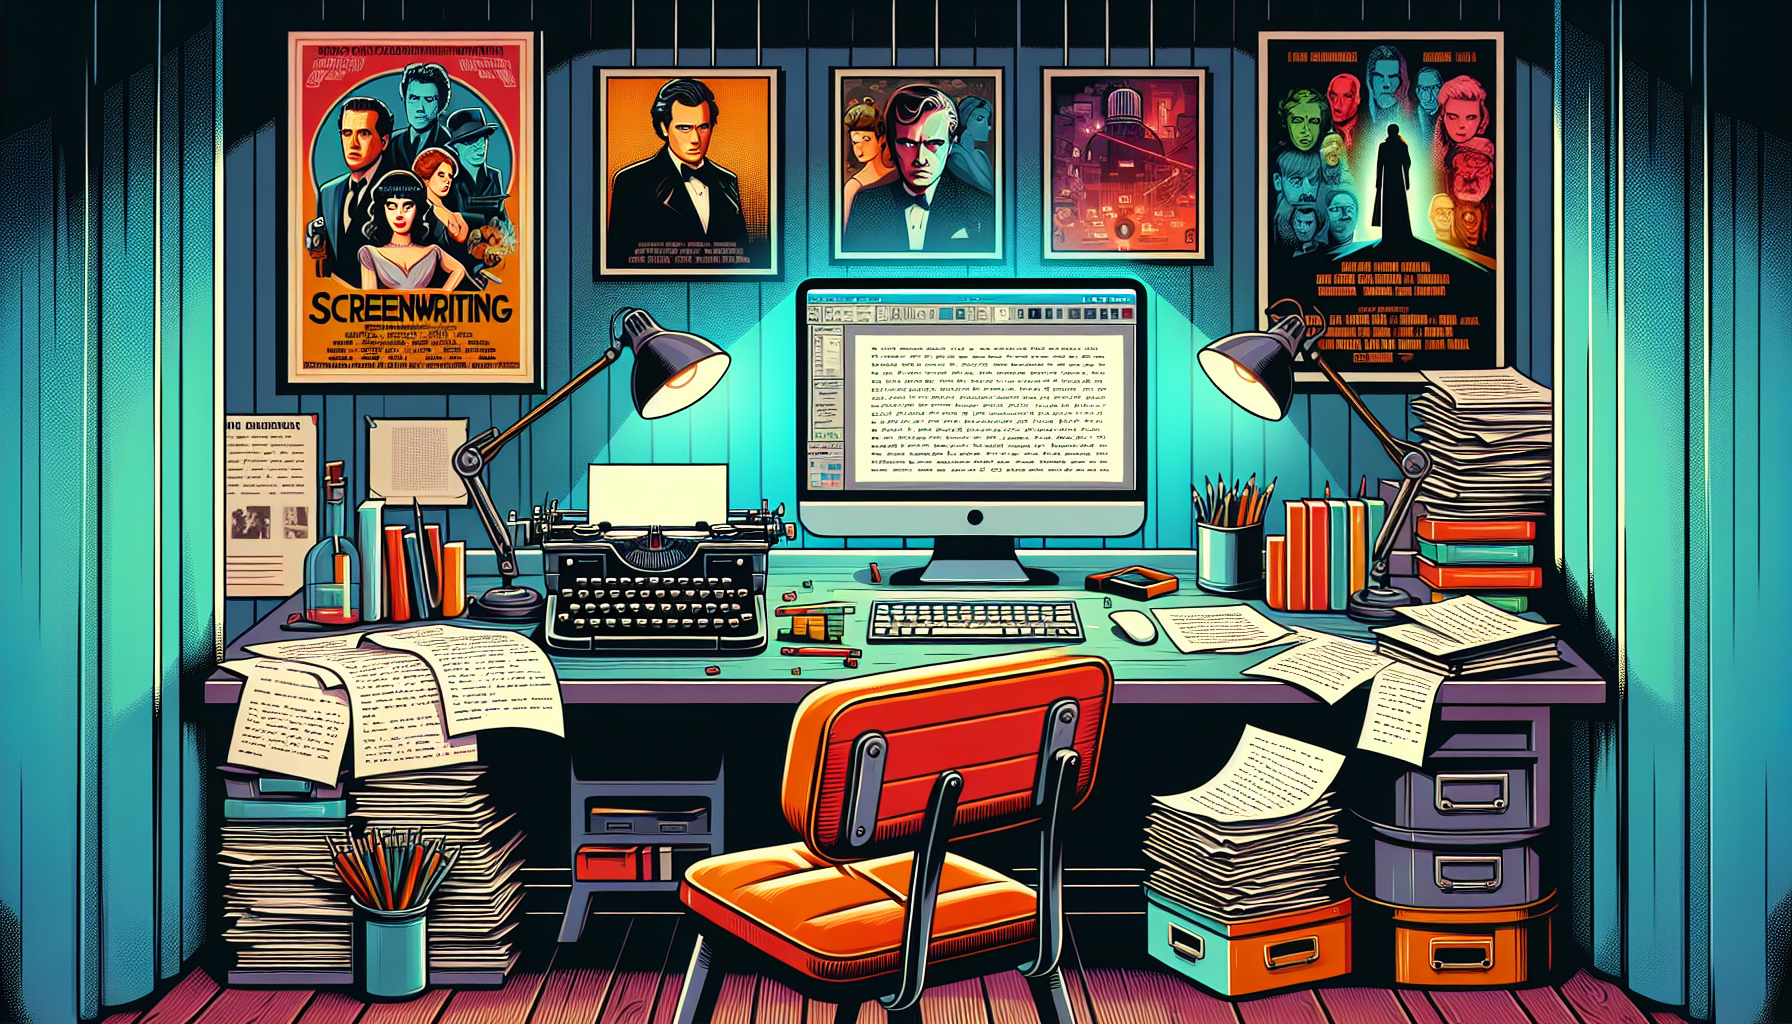 An artist's workspace filled with screenplay drafts, a vintage typewriter, highlighted scripts, and a glowing computer screen displaying screenwriting software, all surrounded by posters of iconic fil